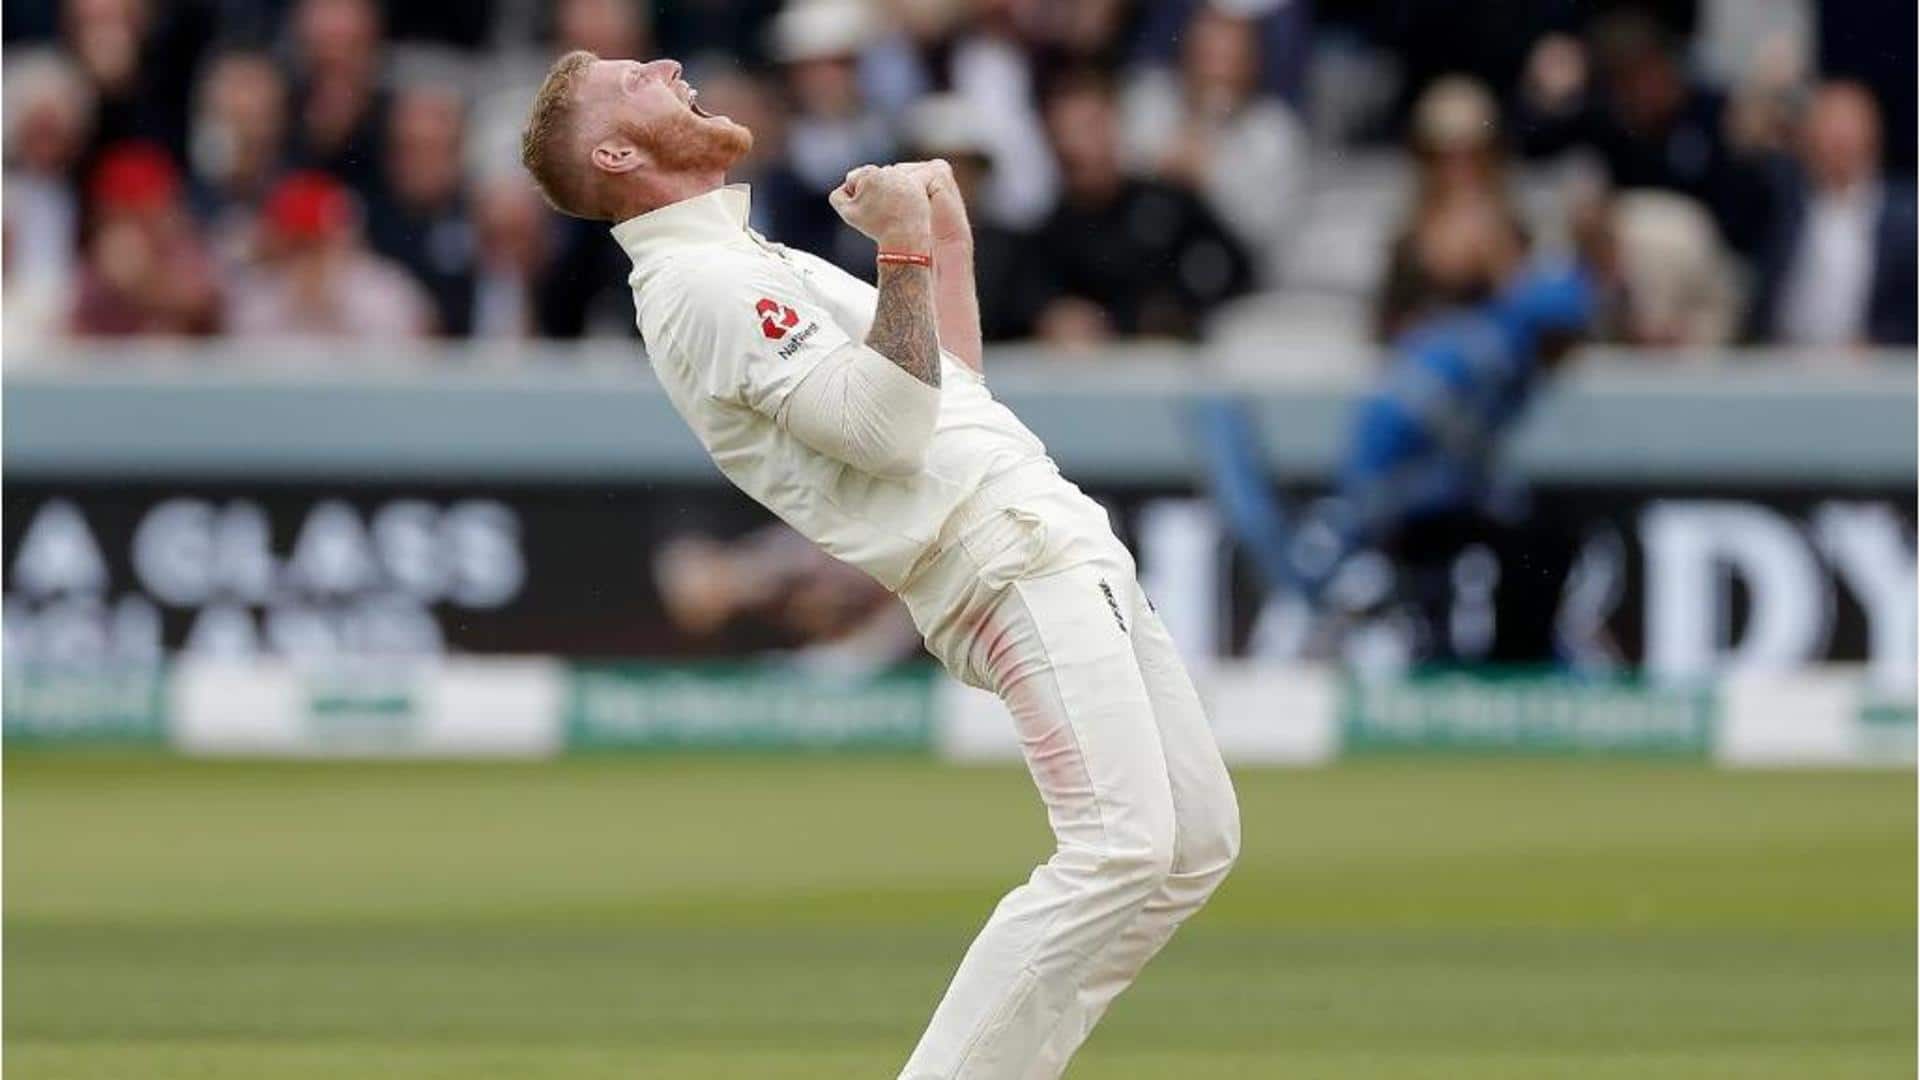 Ben Stokes approaches 200 Test wickets, can accomplish this double